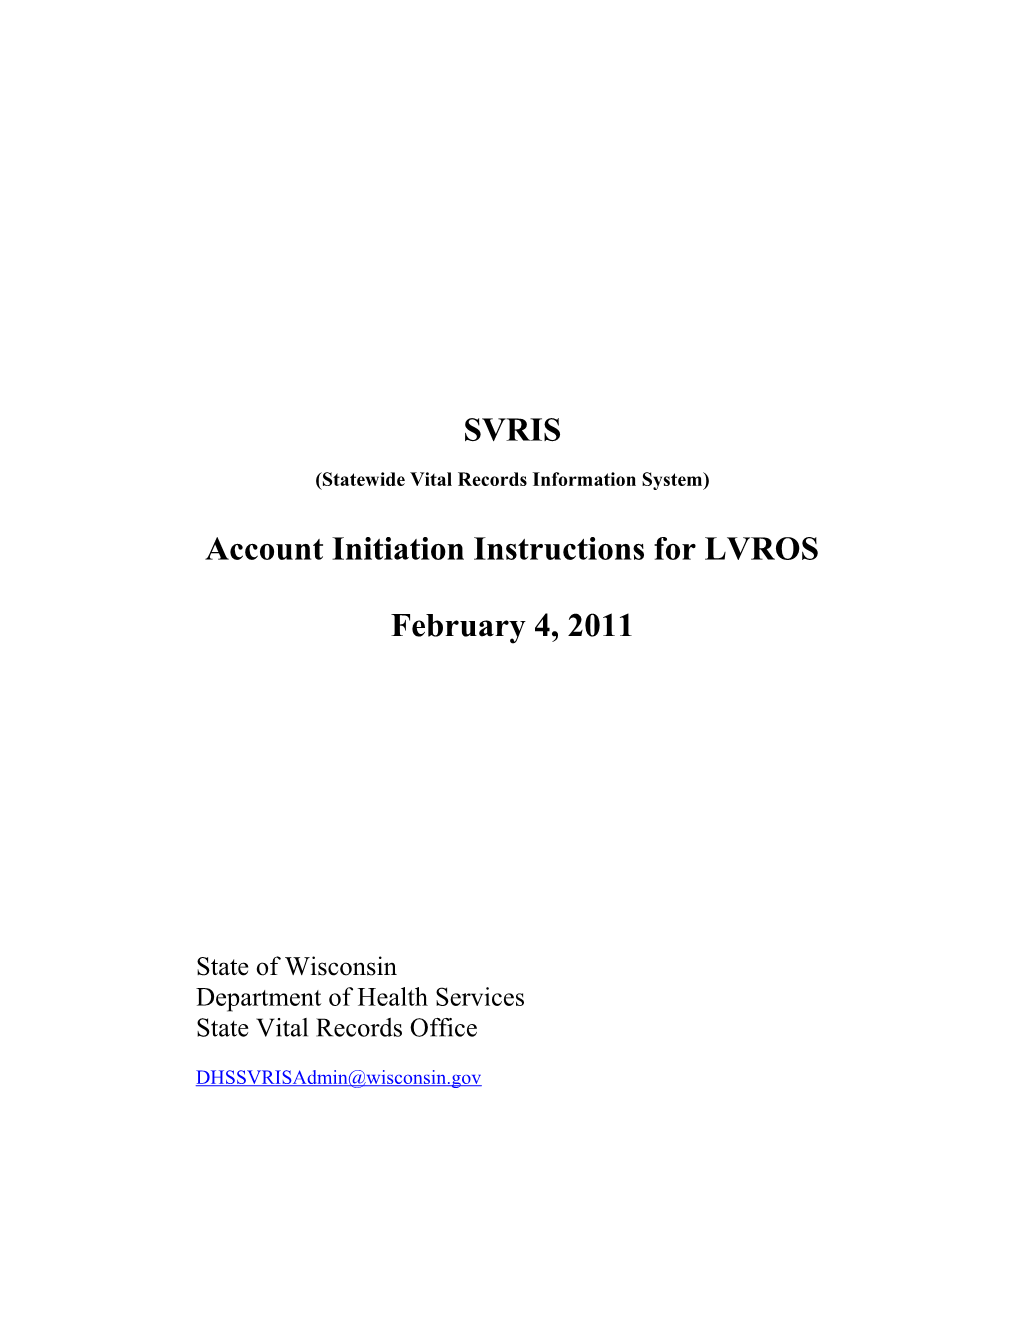 Wisconsin SVRO - Account Initiation Instructions for LVROS